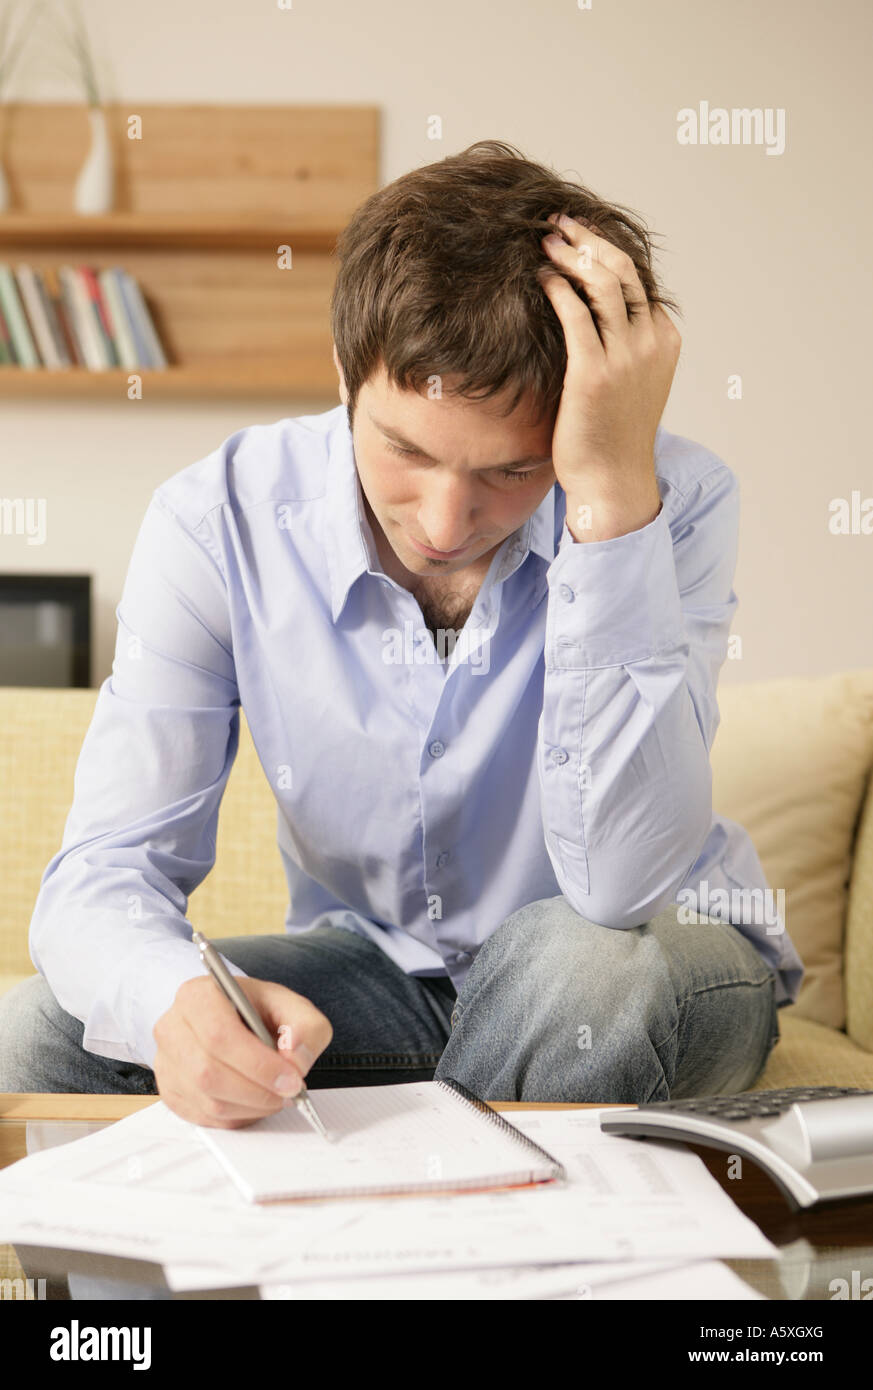 Young man writing on notepad hand in hair Stock Photo